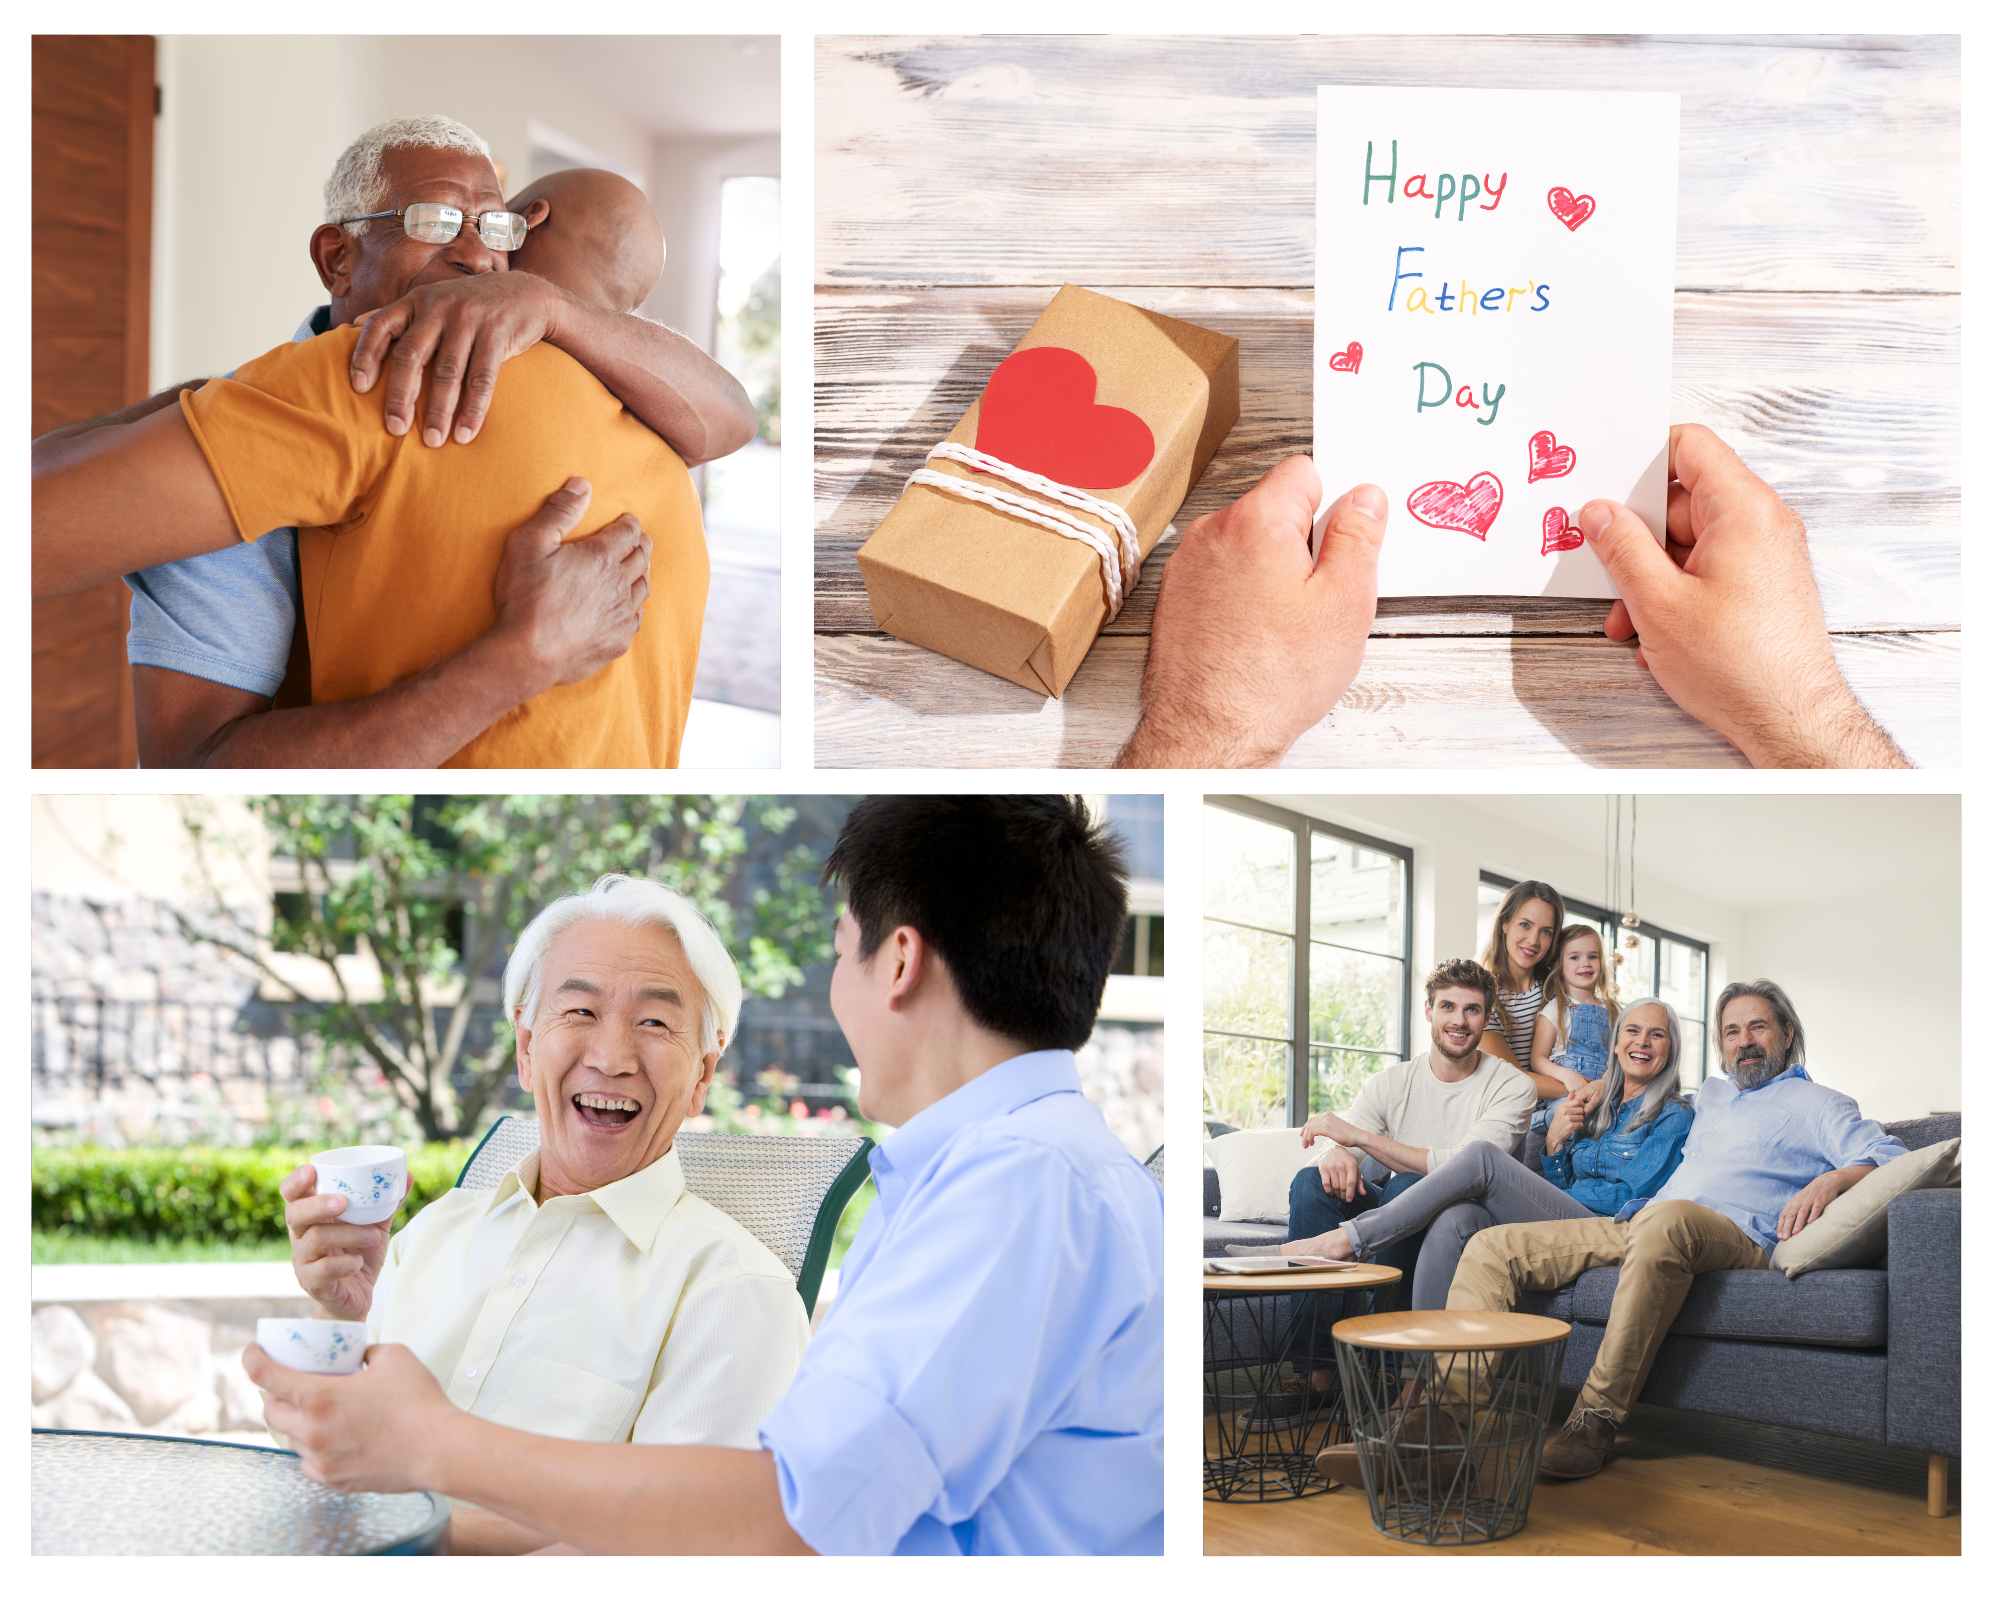 Making Your Elderly Loved One Feel Special on Father's Day